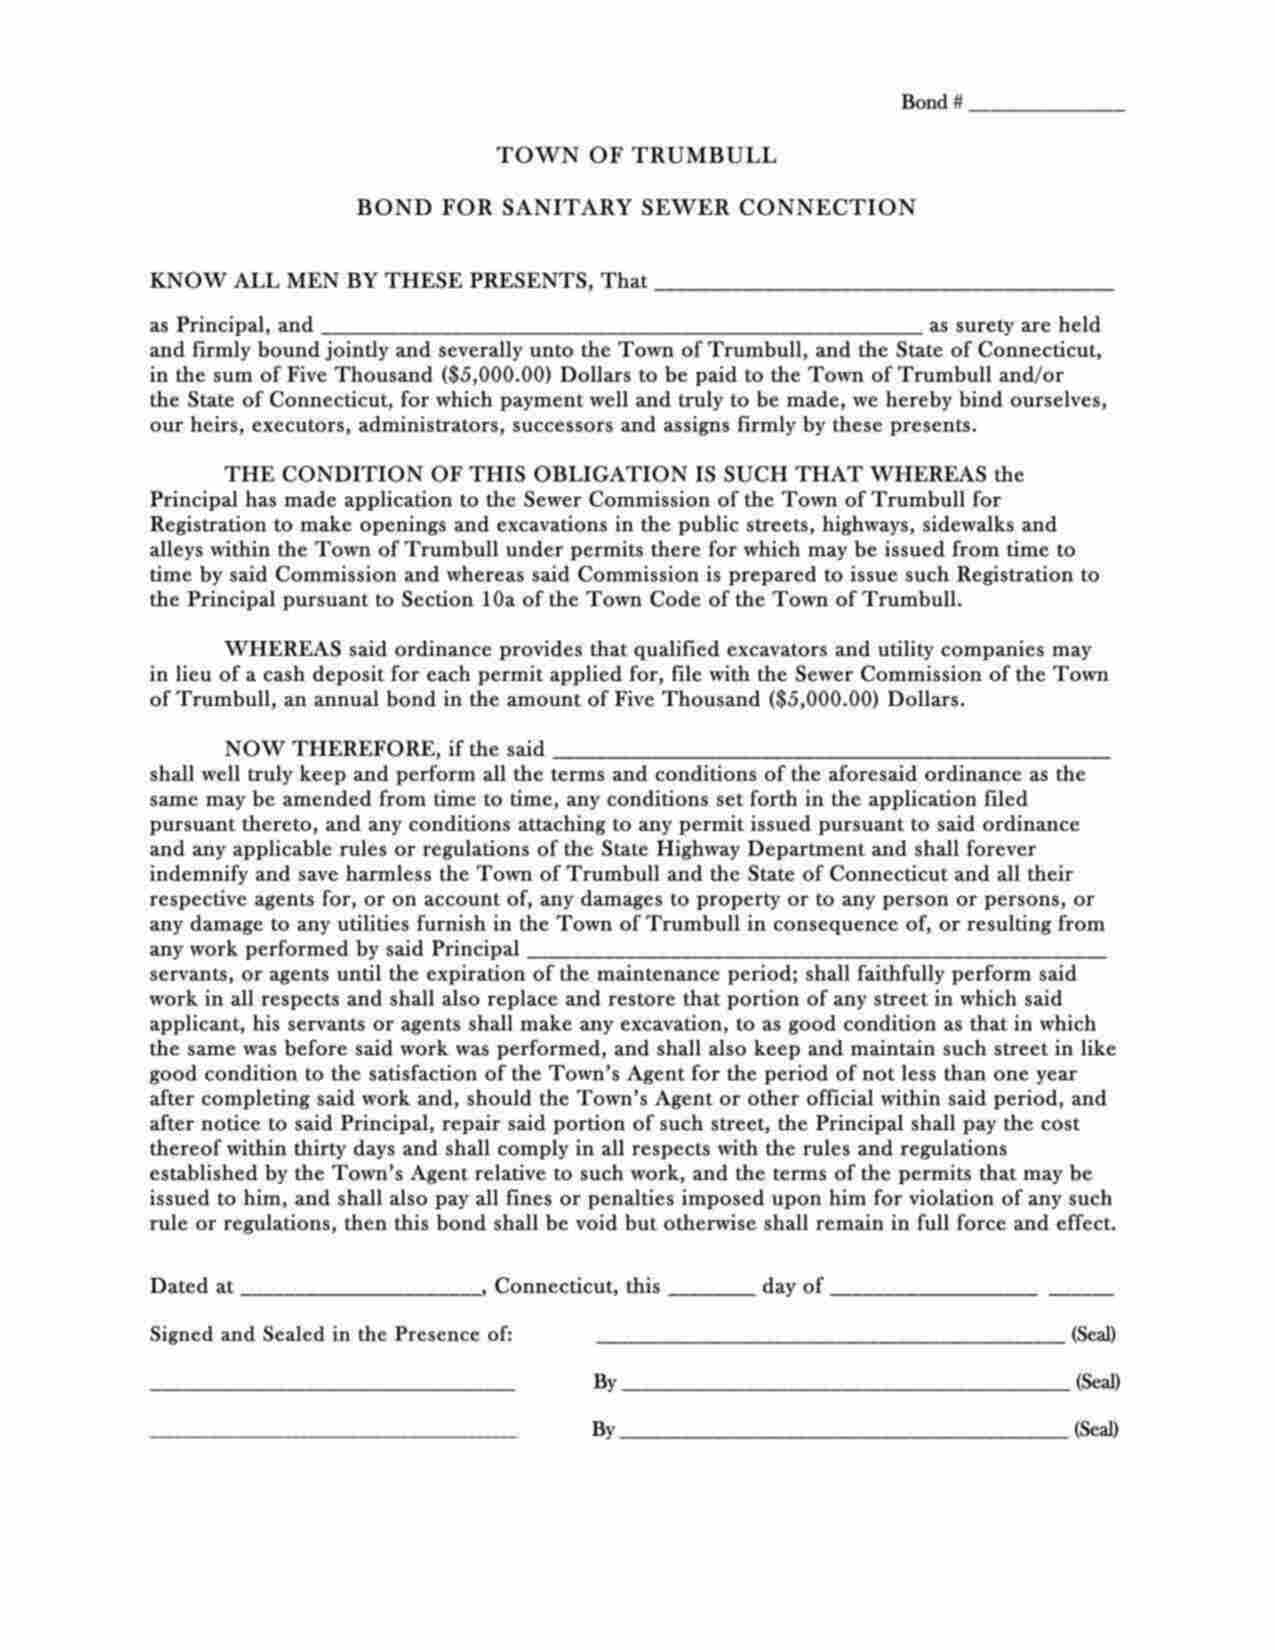 Connecticut Sanitary Sewer Connection Bond Form